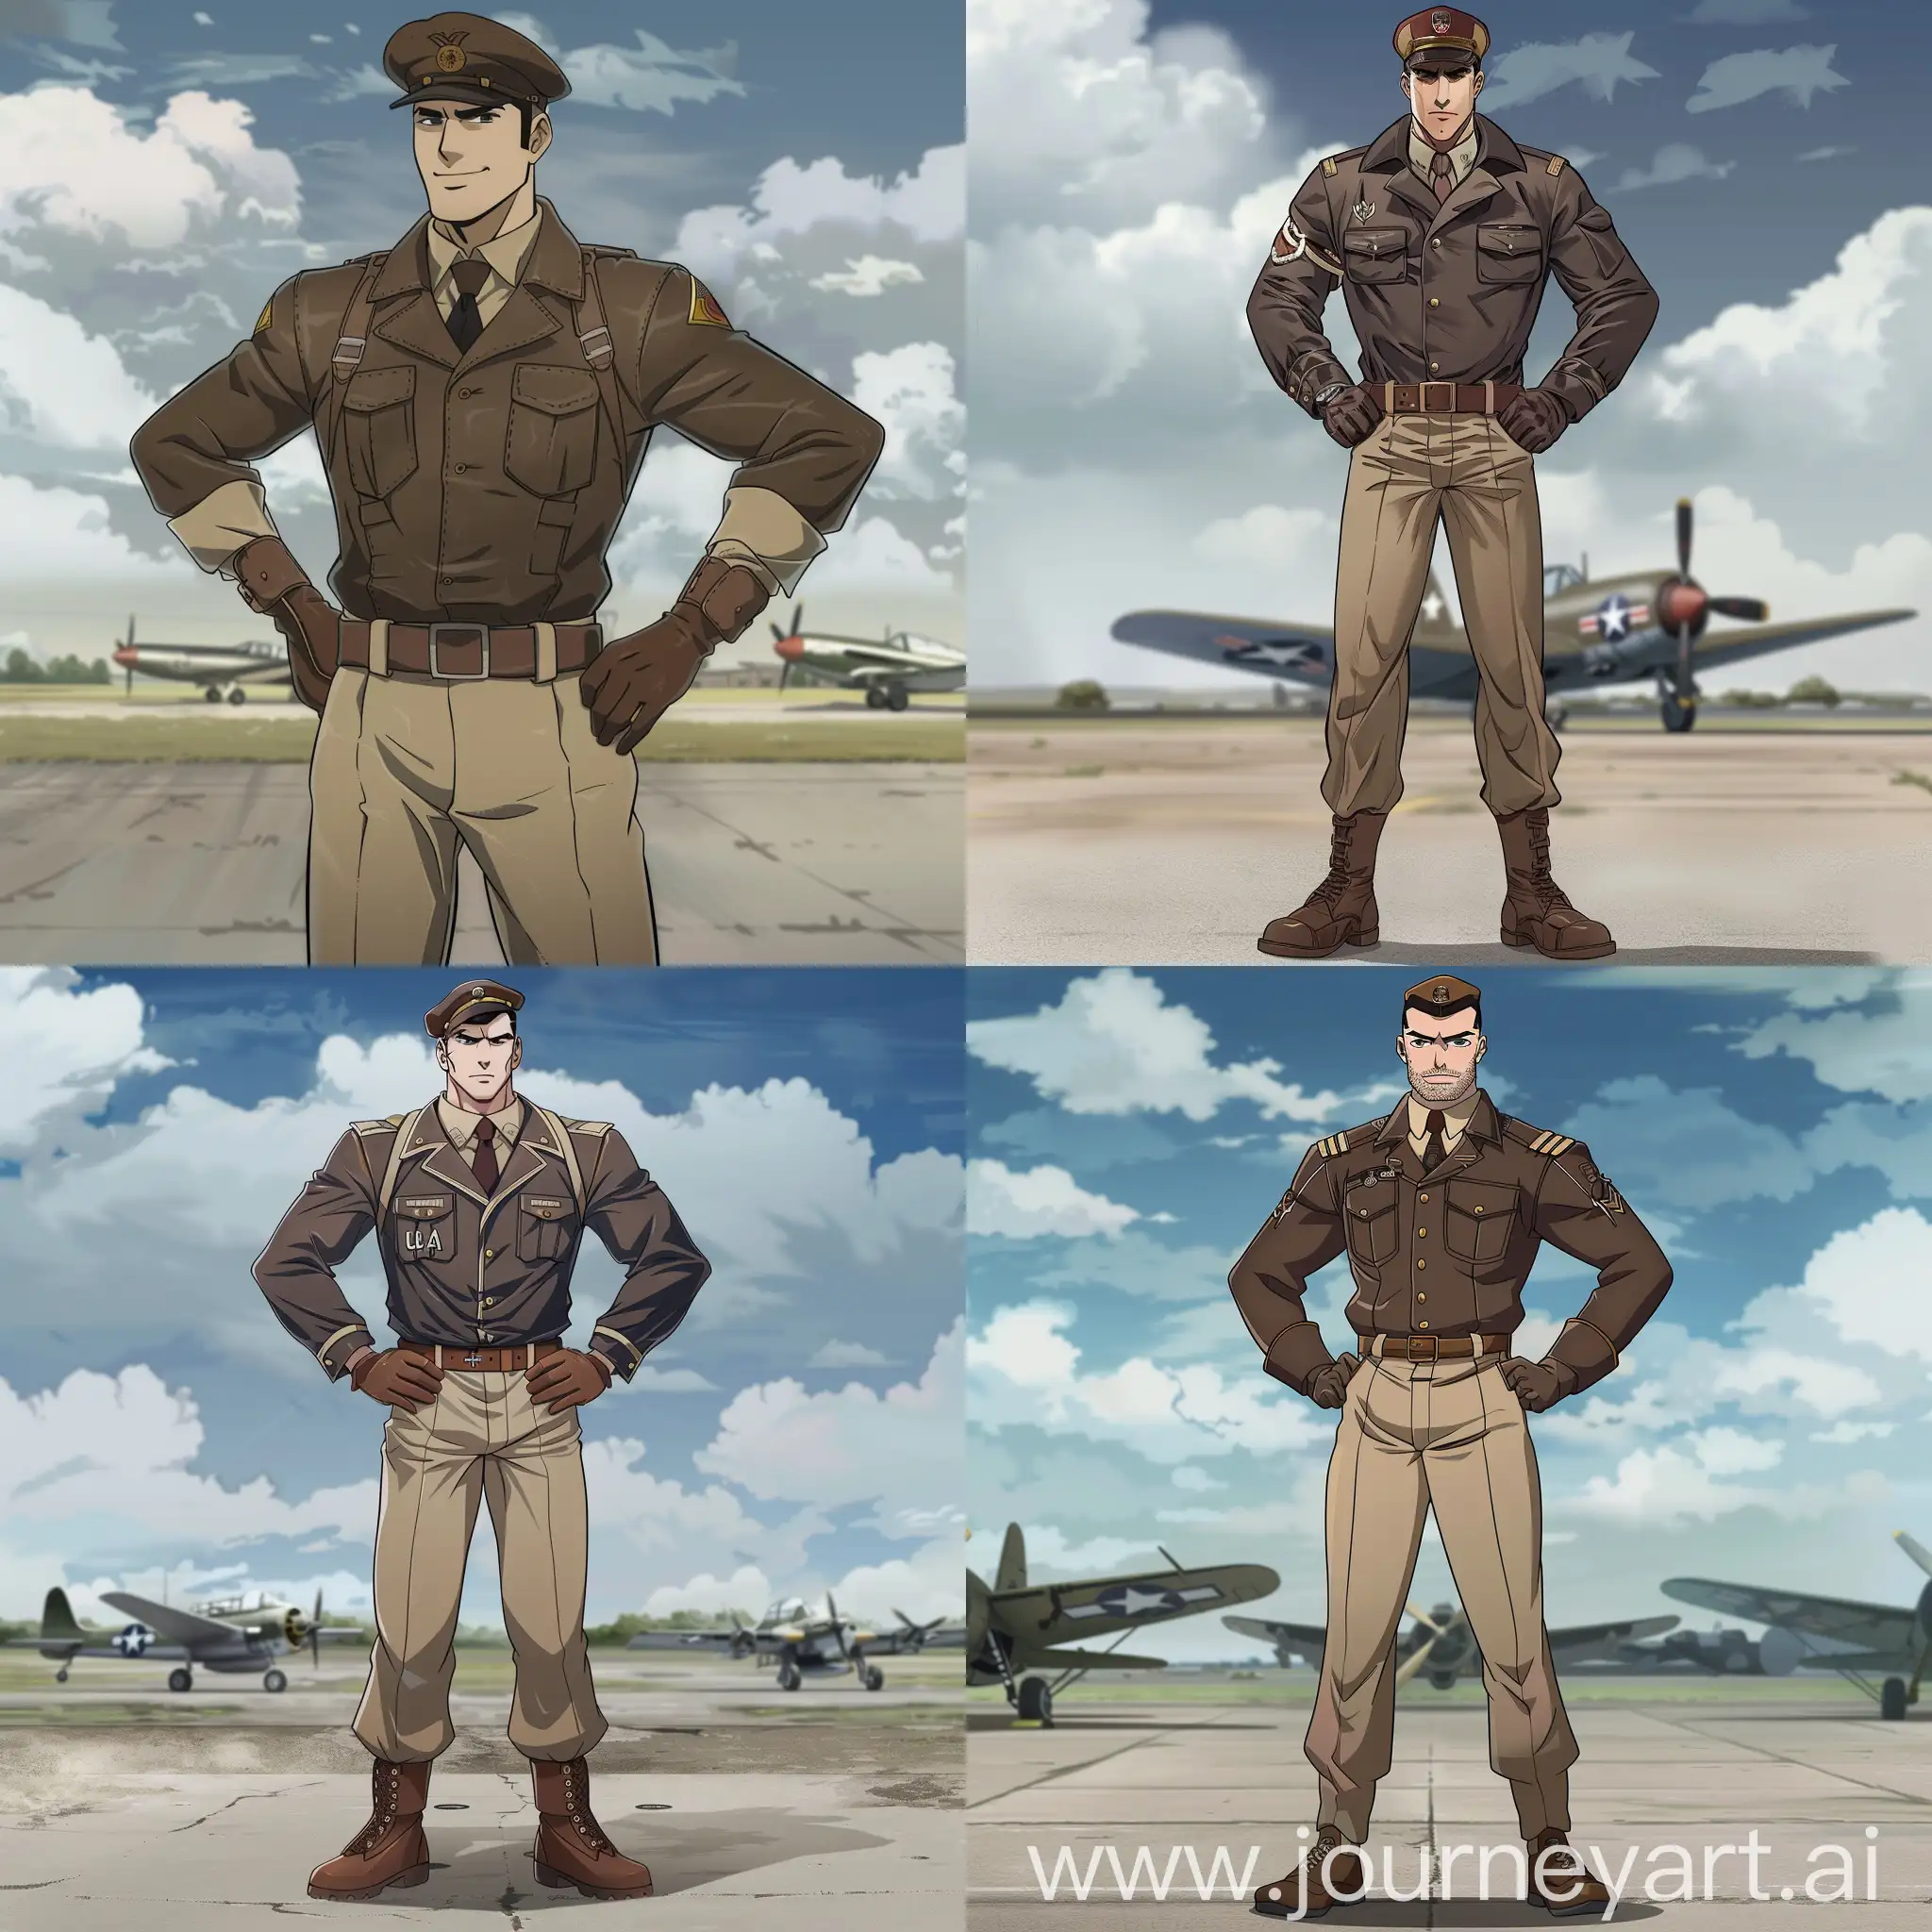 Handsome-TanSkinned-WWII-Officer-in-AnimeStyle-Attire-at-Airfield